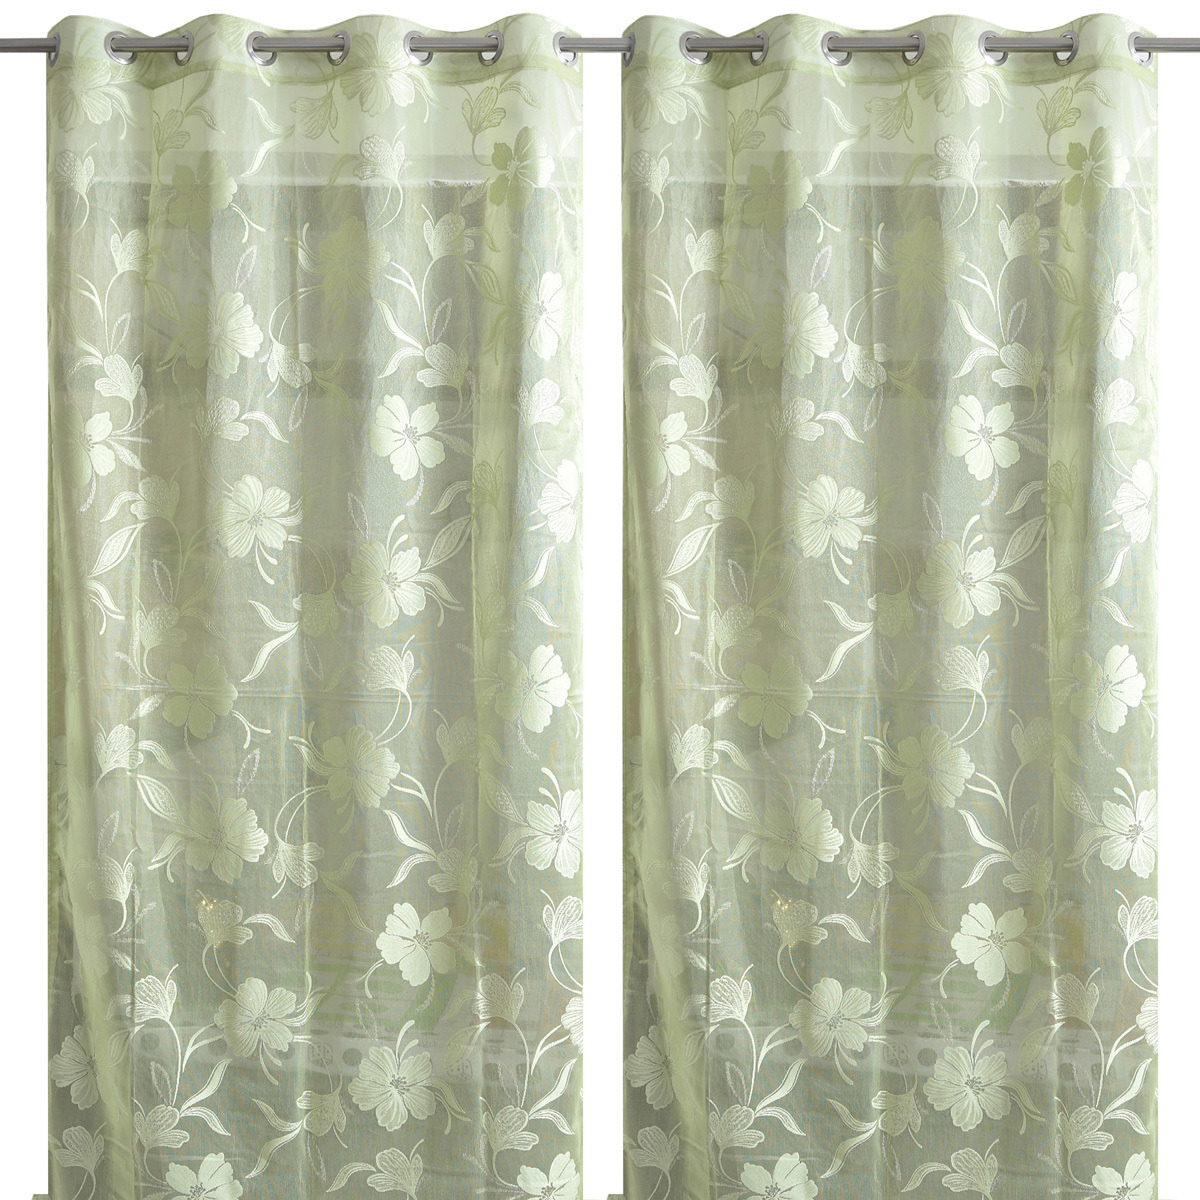 HANDTEX HOME Sheer Green Net Curtains With Beautiful Embroidered Floral Designs for Door 4ft x 7ft Set of 2 SP01